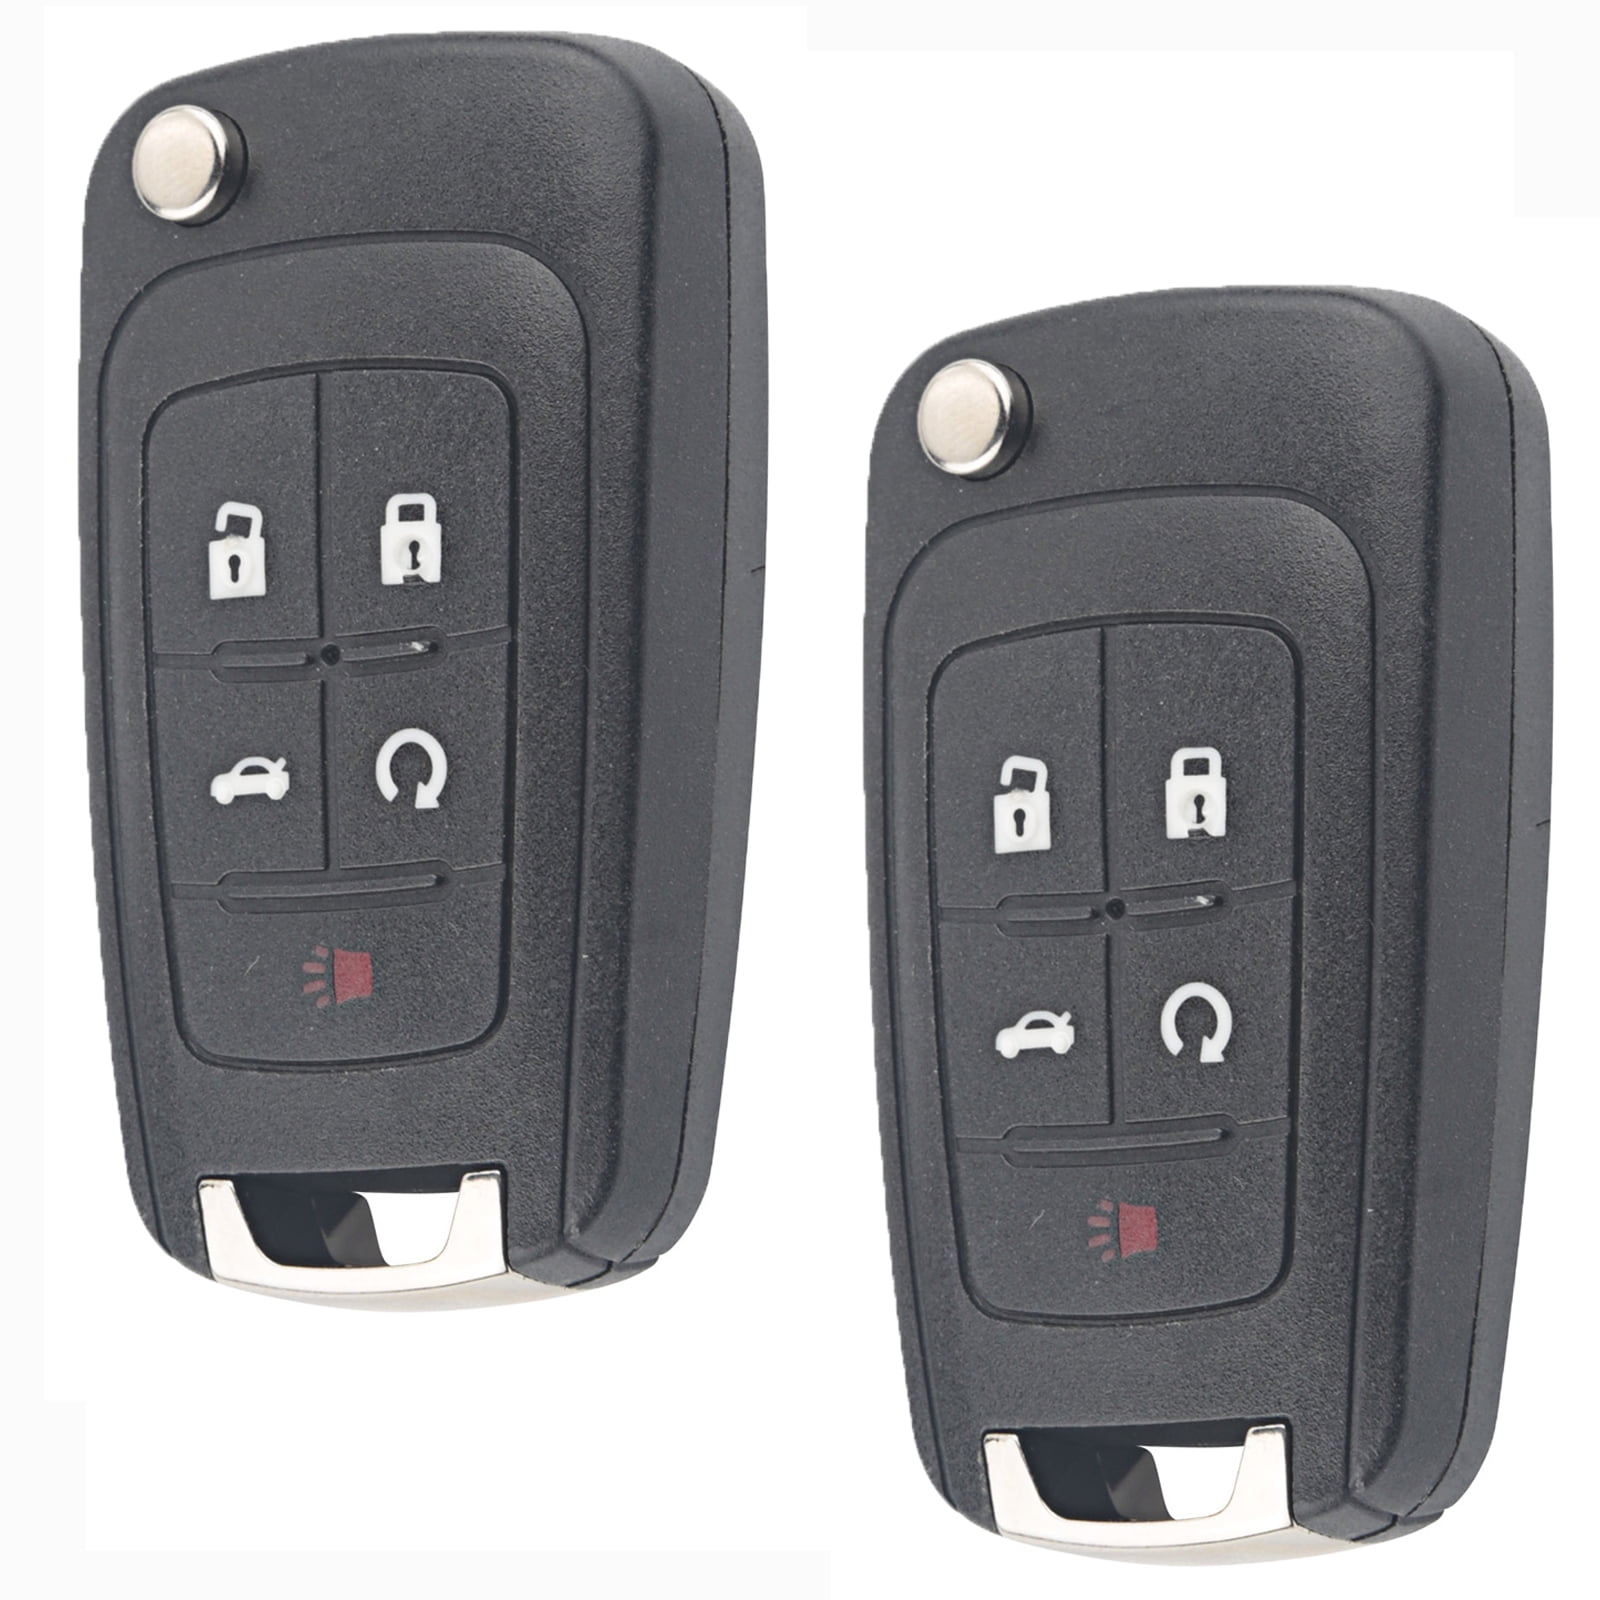 2X Replacement Remote Car Key for GMC Terrain 2010 2011 2012 2013 2014 2015 2016 